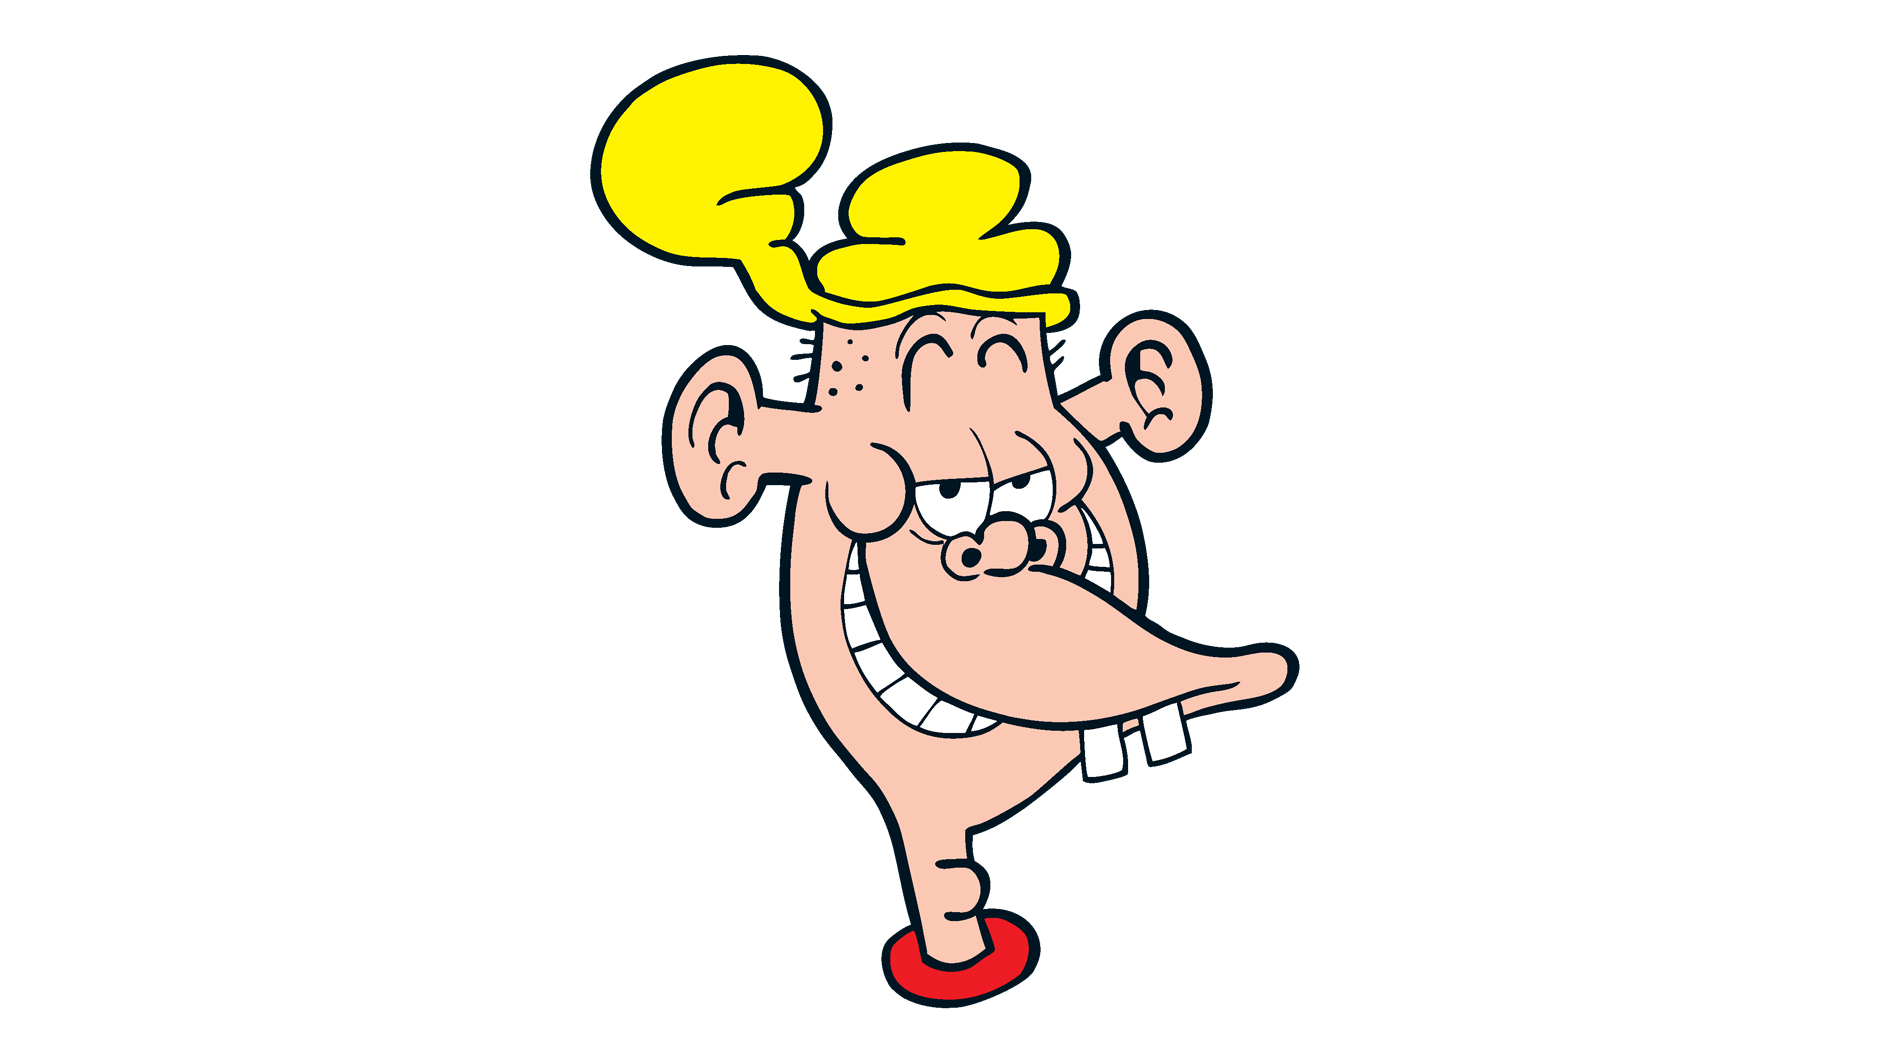 Plug from Beano's The Bash Street Kids always was a handsome devil